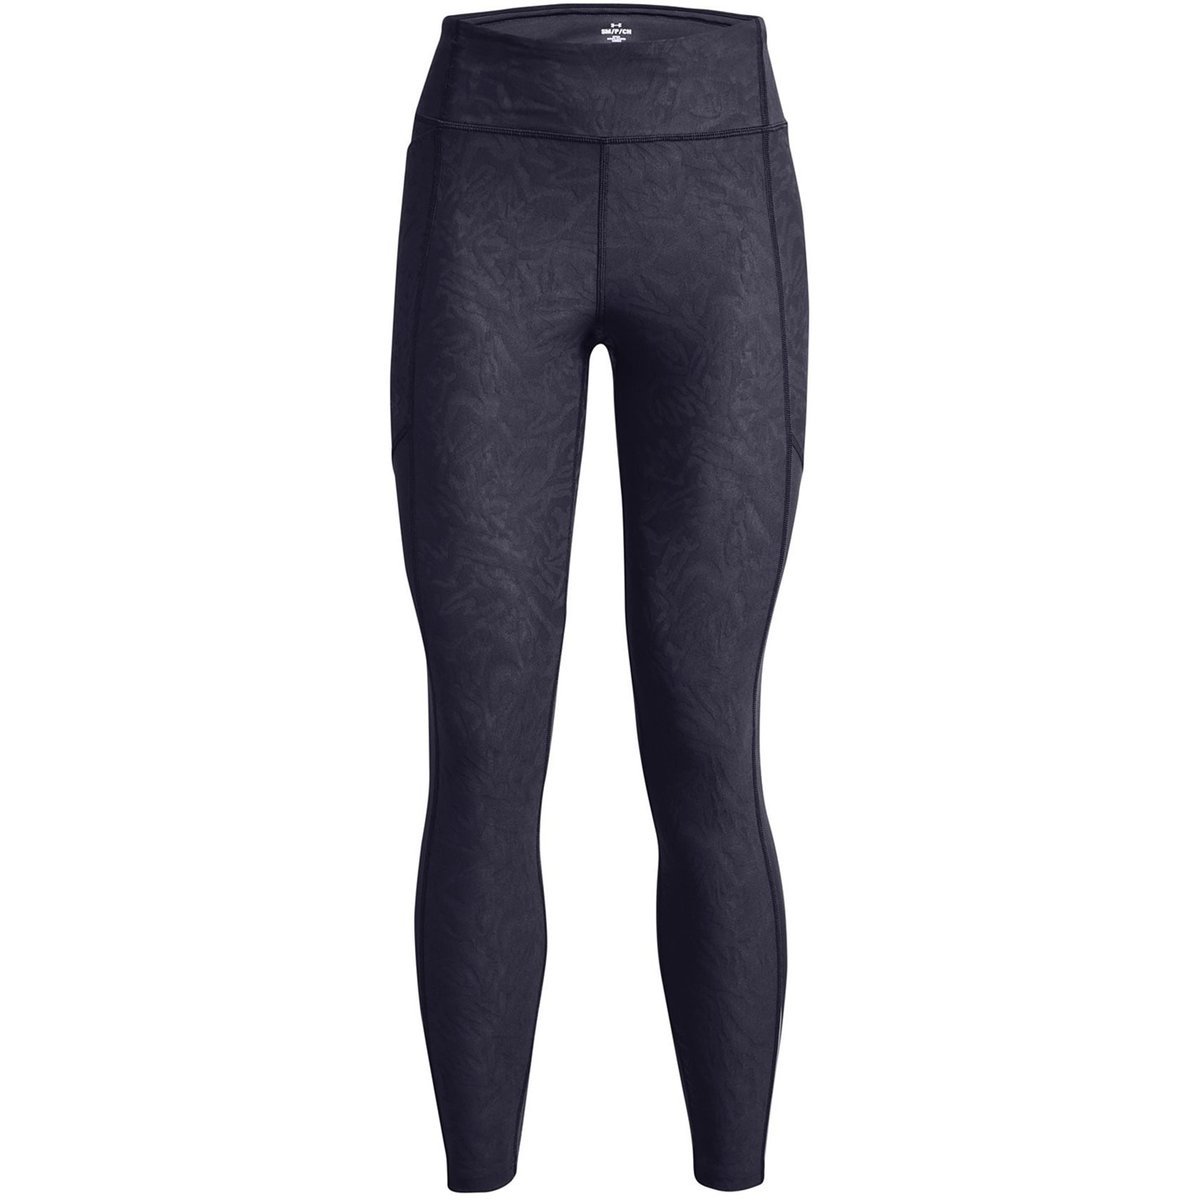 Under armour, Jogging bottoms, Womens sports clothing